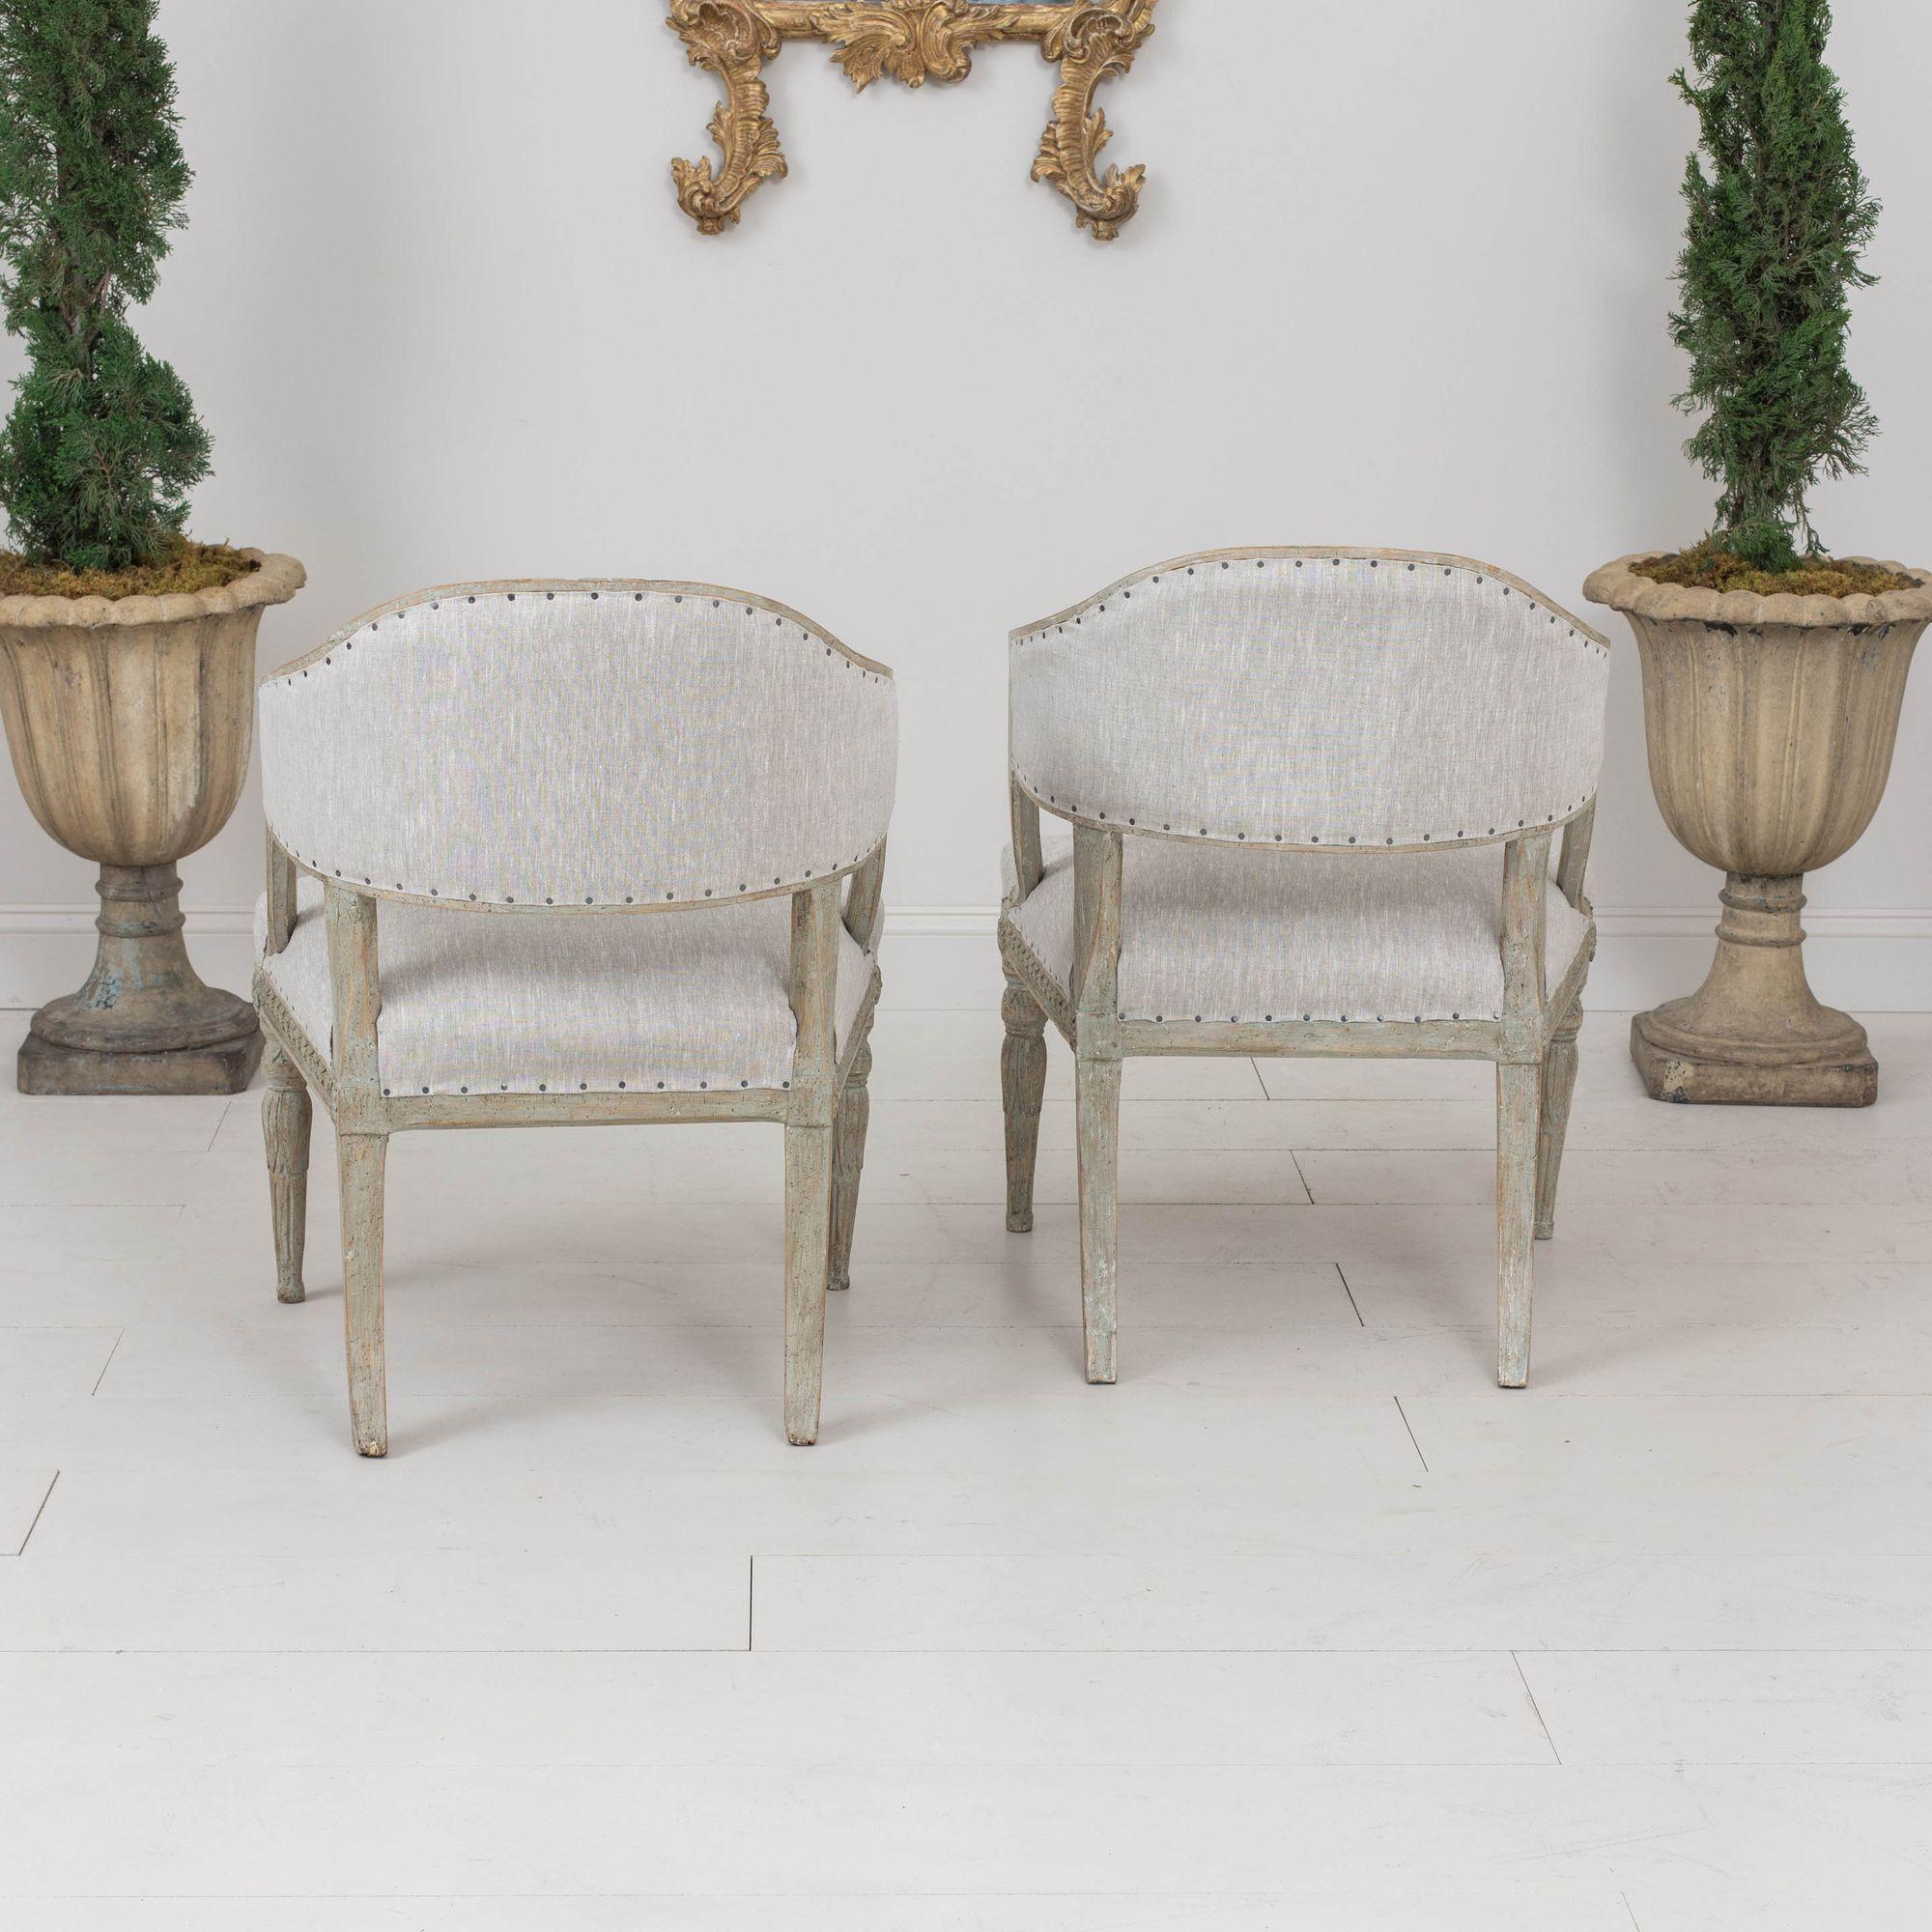 19th c. Pair of Swedish Gustavian Painted Barrel Back Armchairs For Sale 13